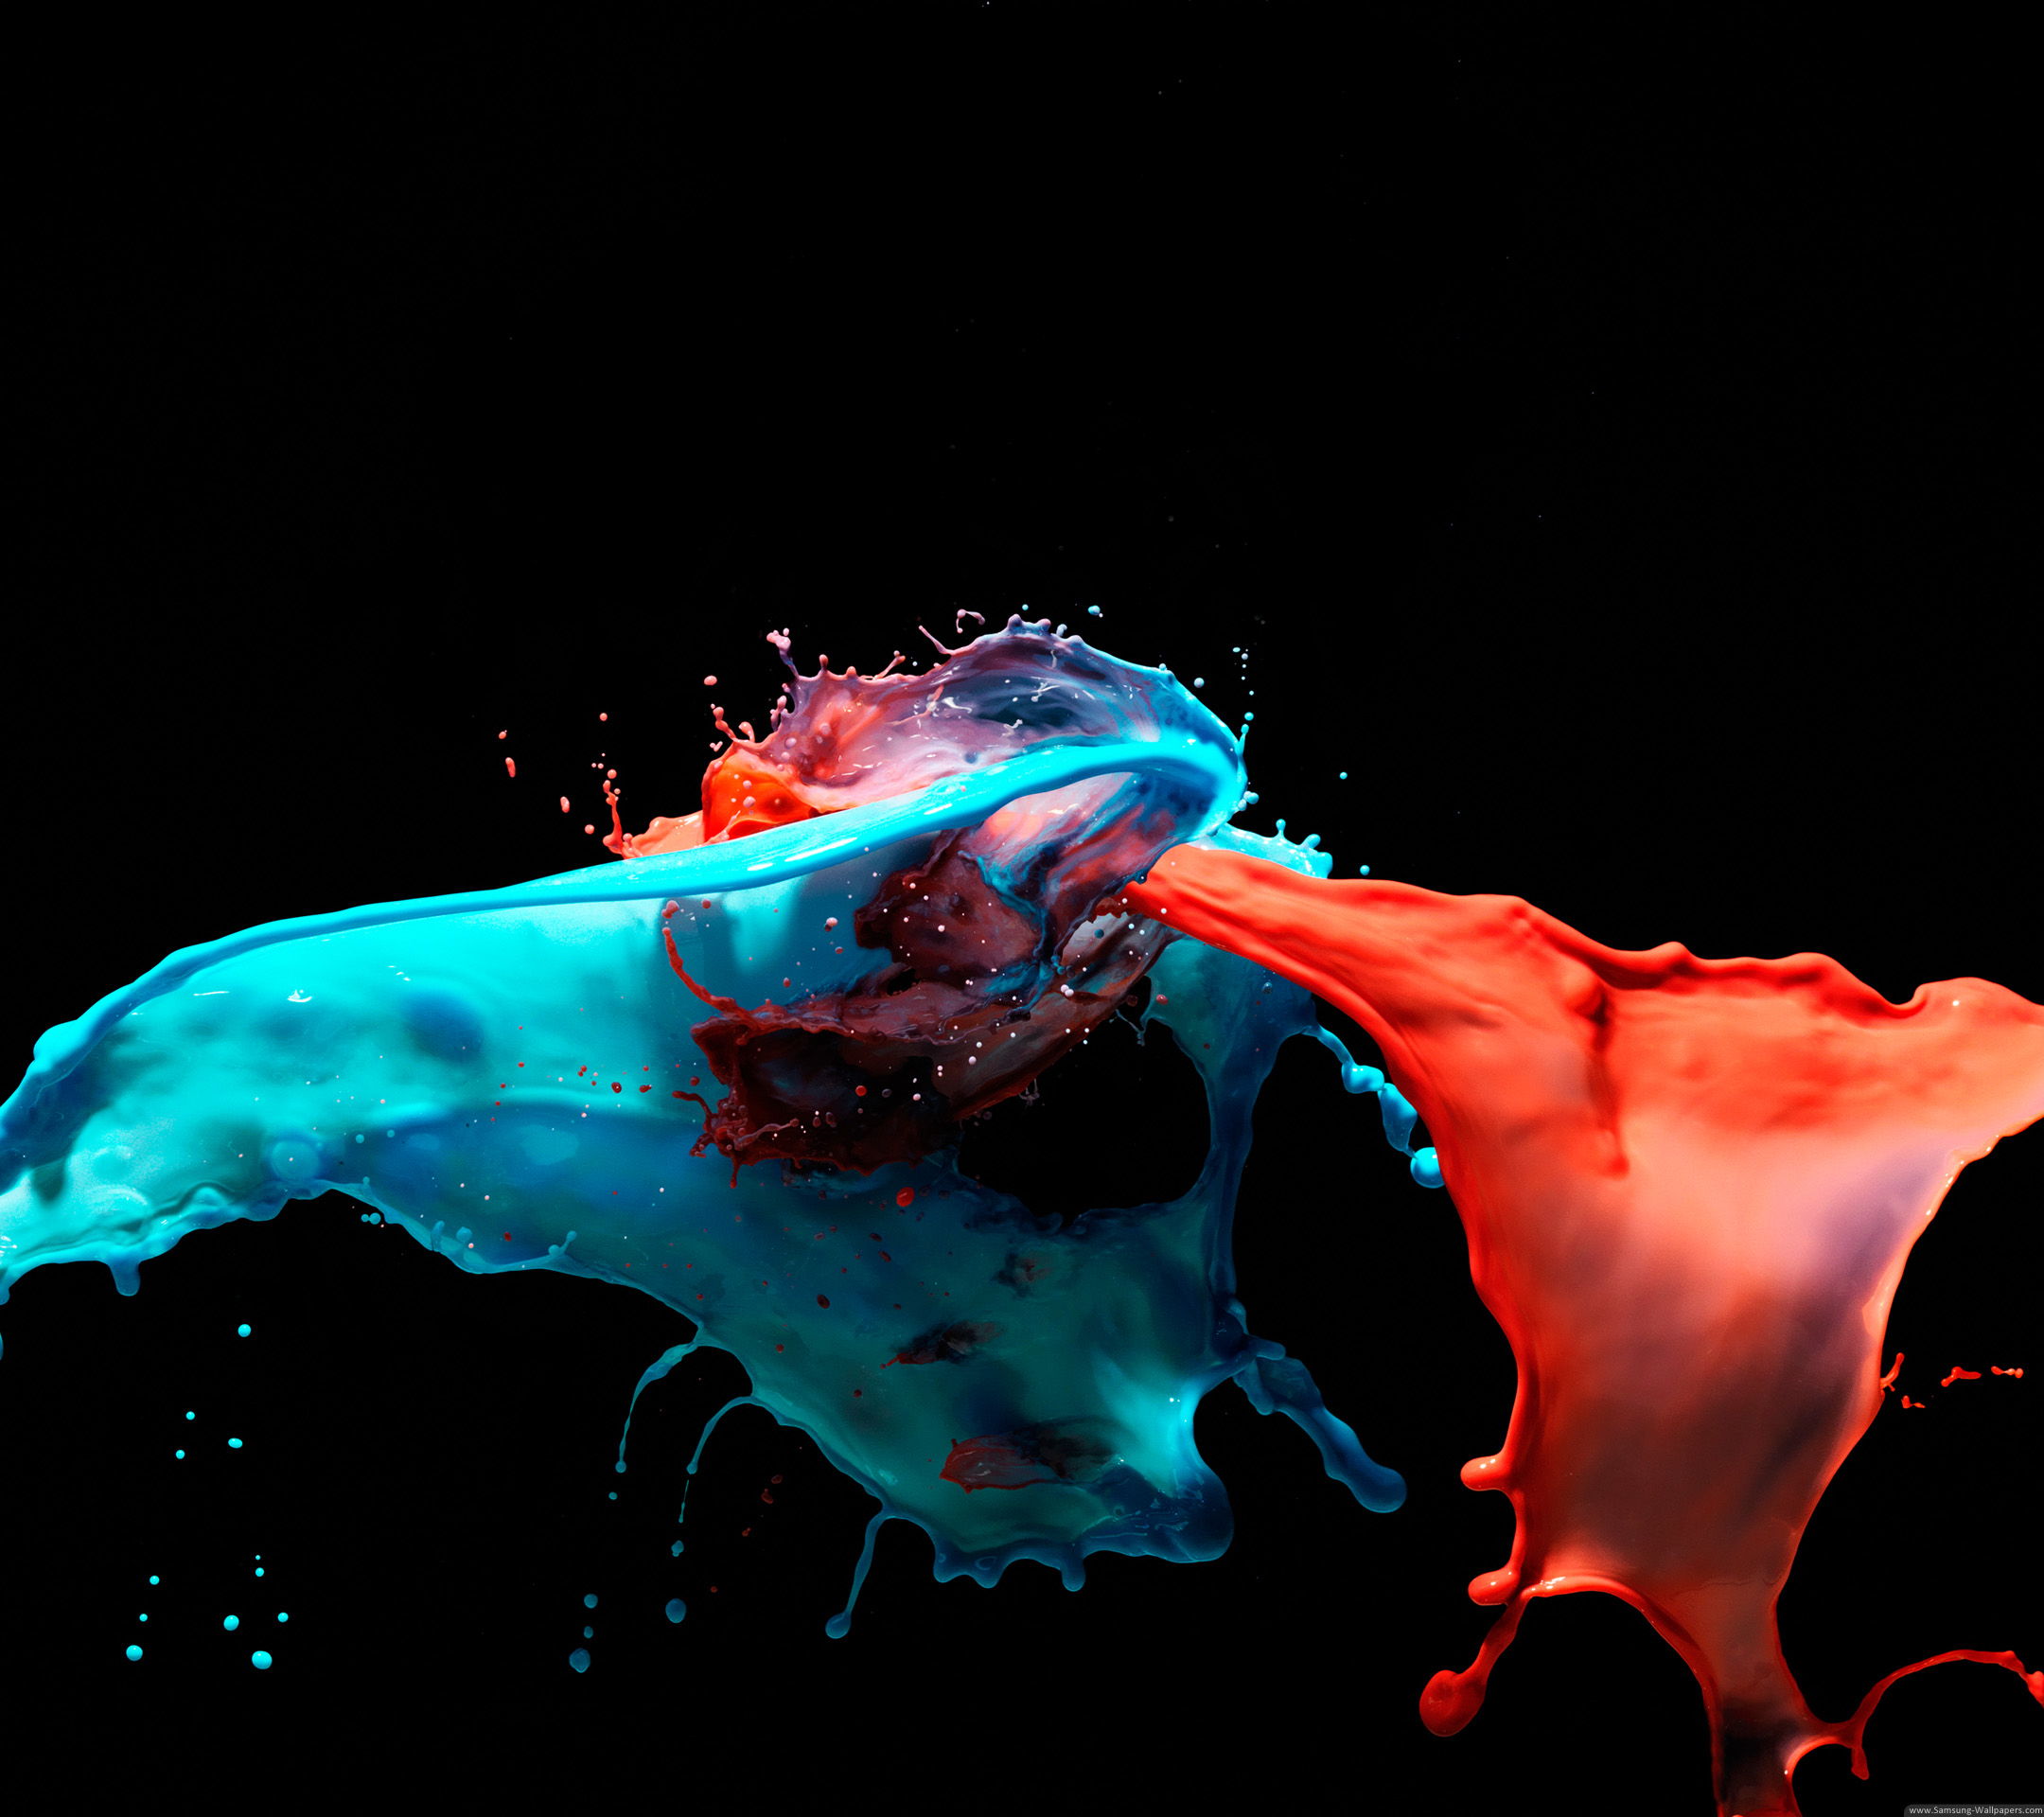 1080p HD wallpapers for the Sony Xperia Z2